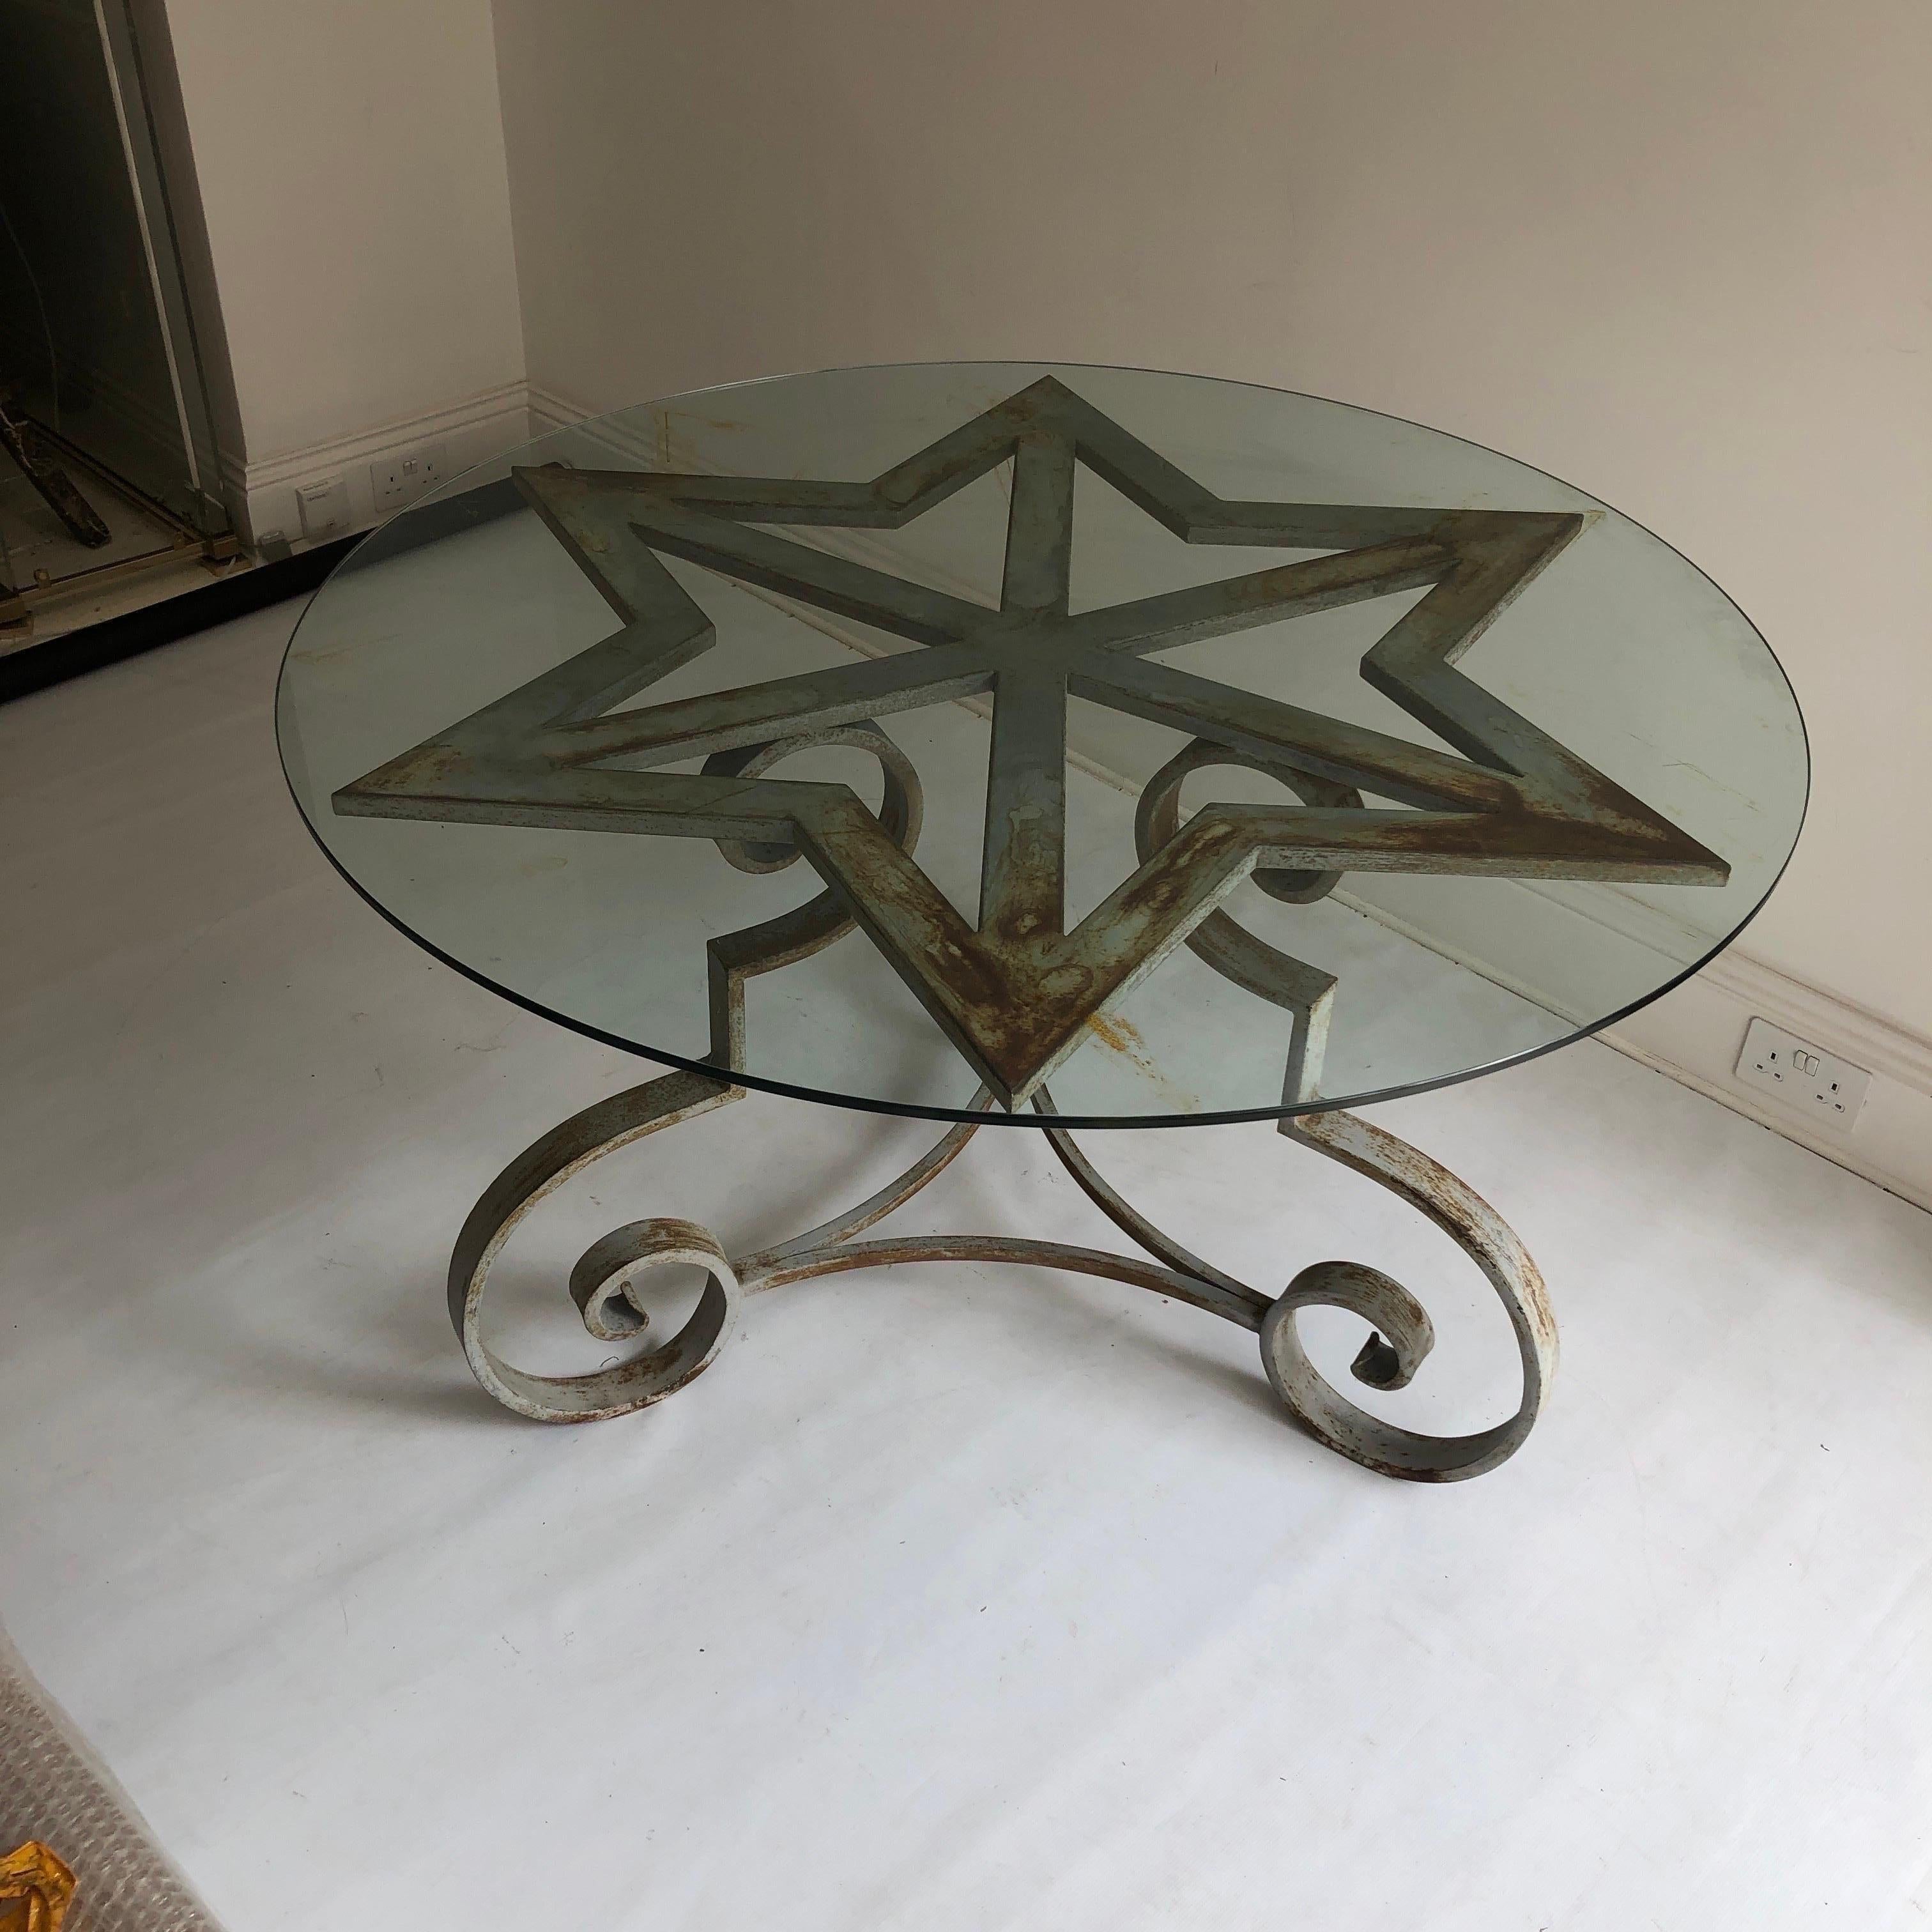 Garden Glass Star Shaped Cast Iron Round Dining Table 1970s French Antique 60s For Sale 8